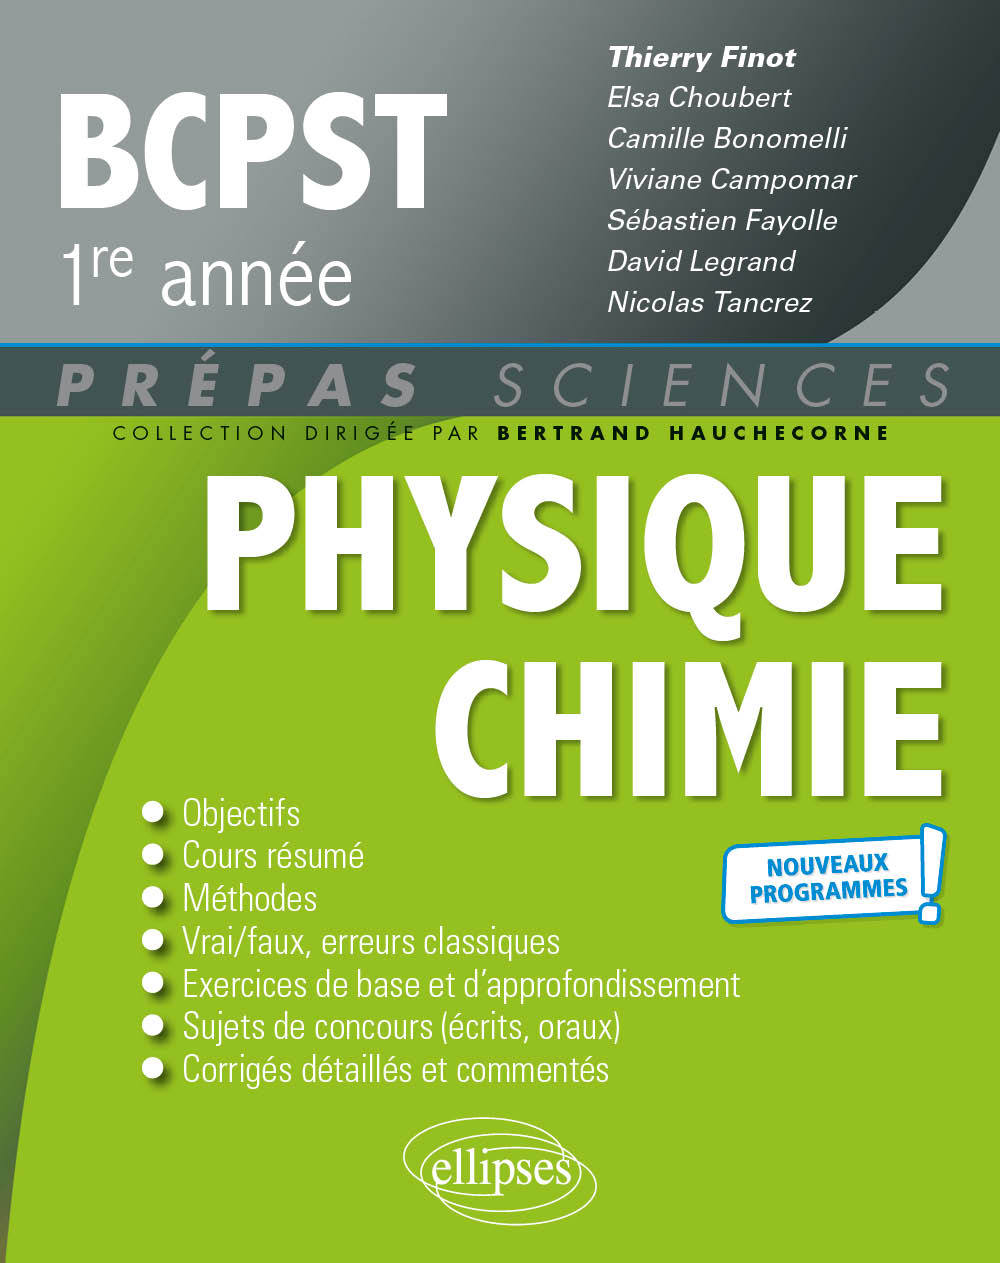 Kniha Physique-Chimie BCPST1 -  Programme 2021 Finot